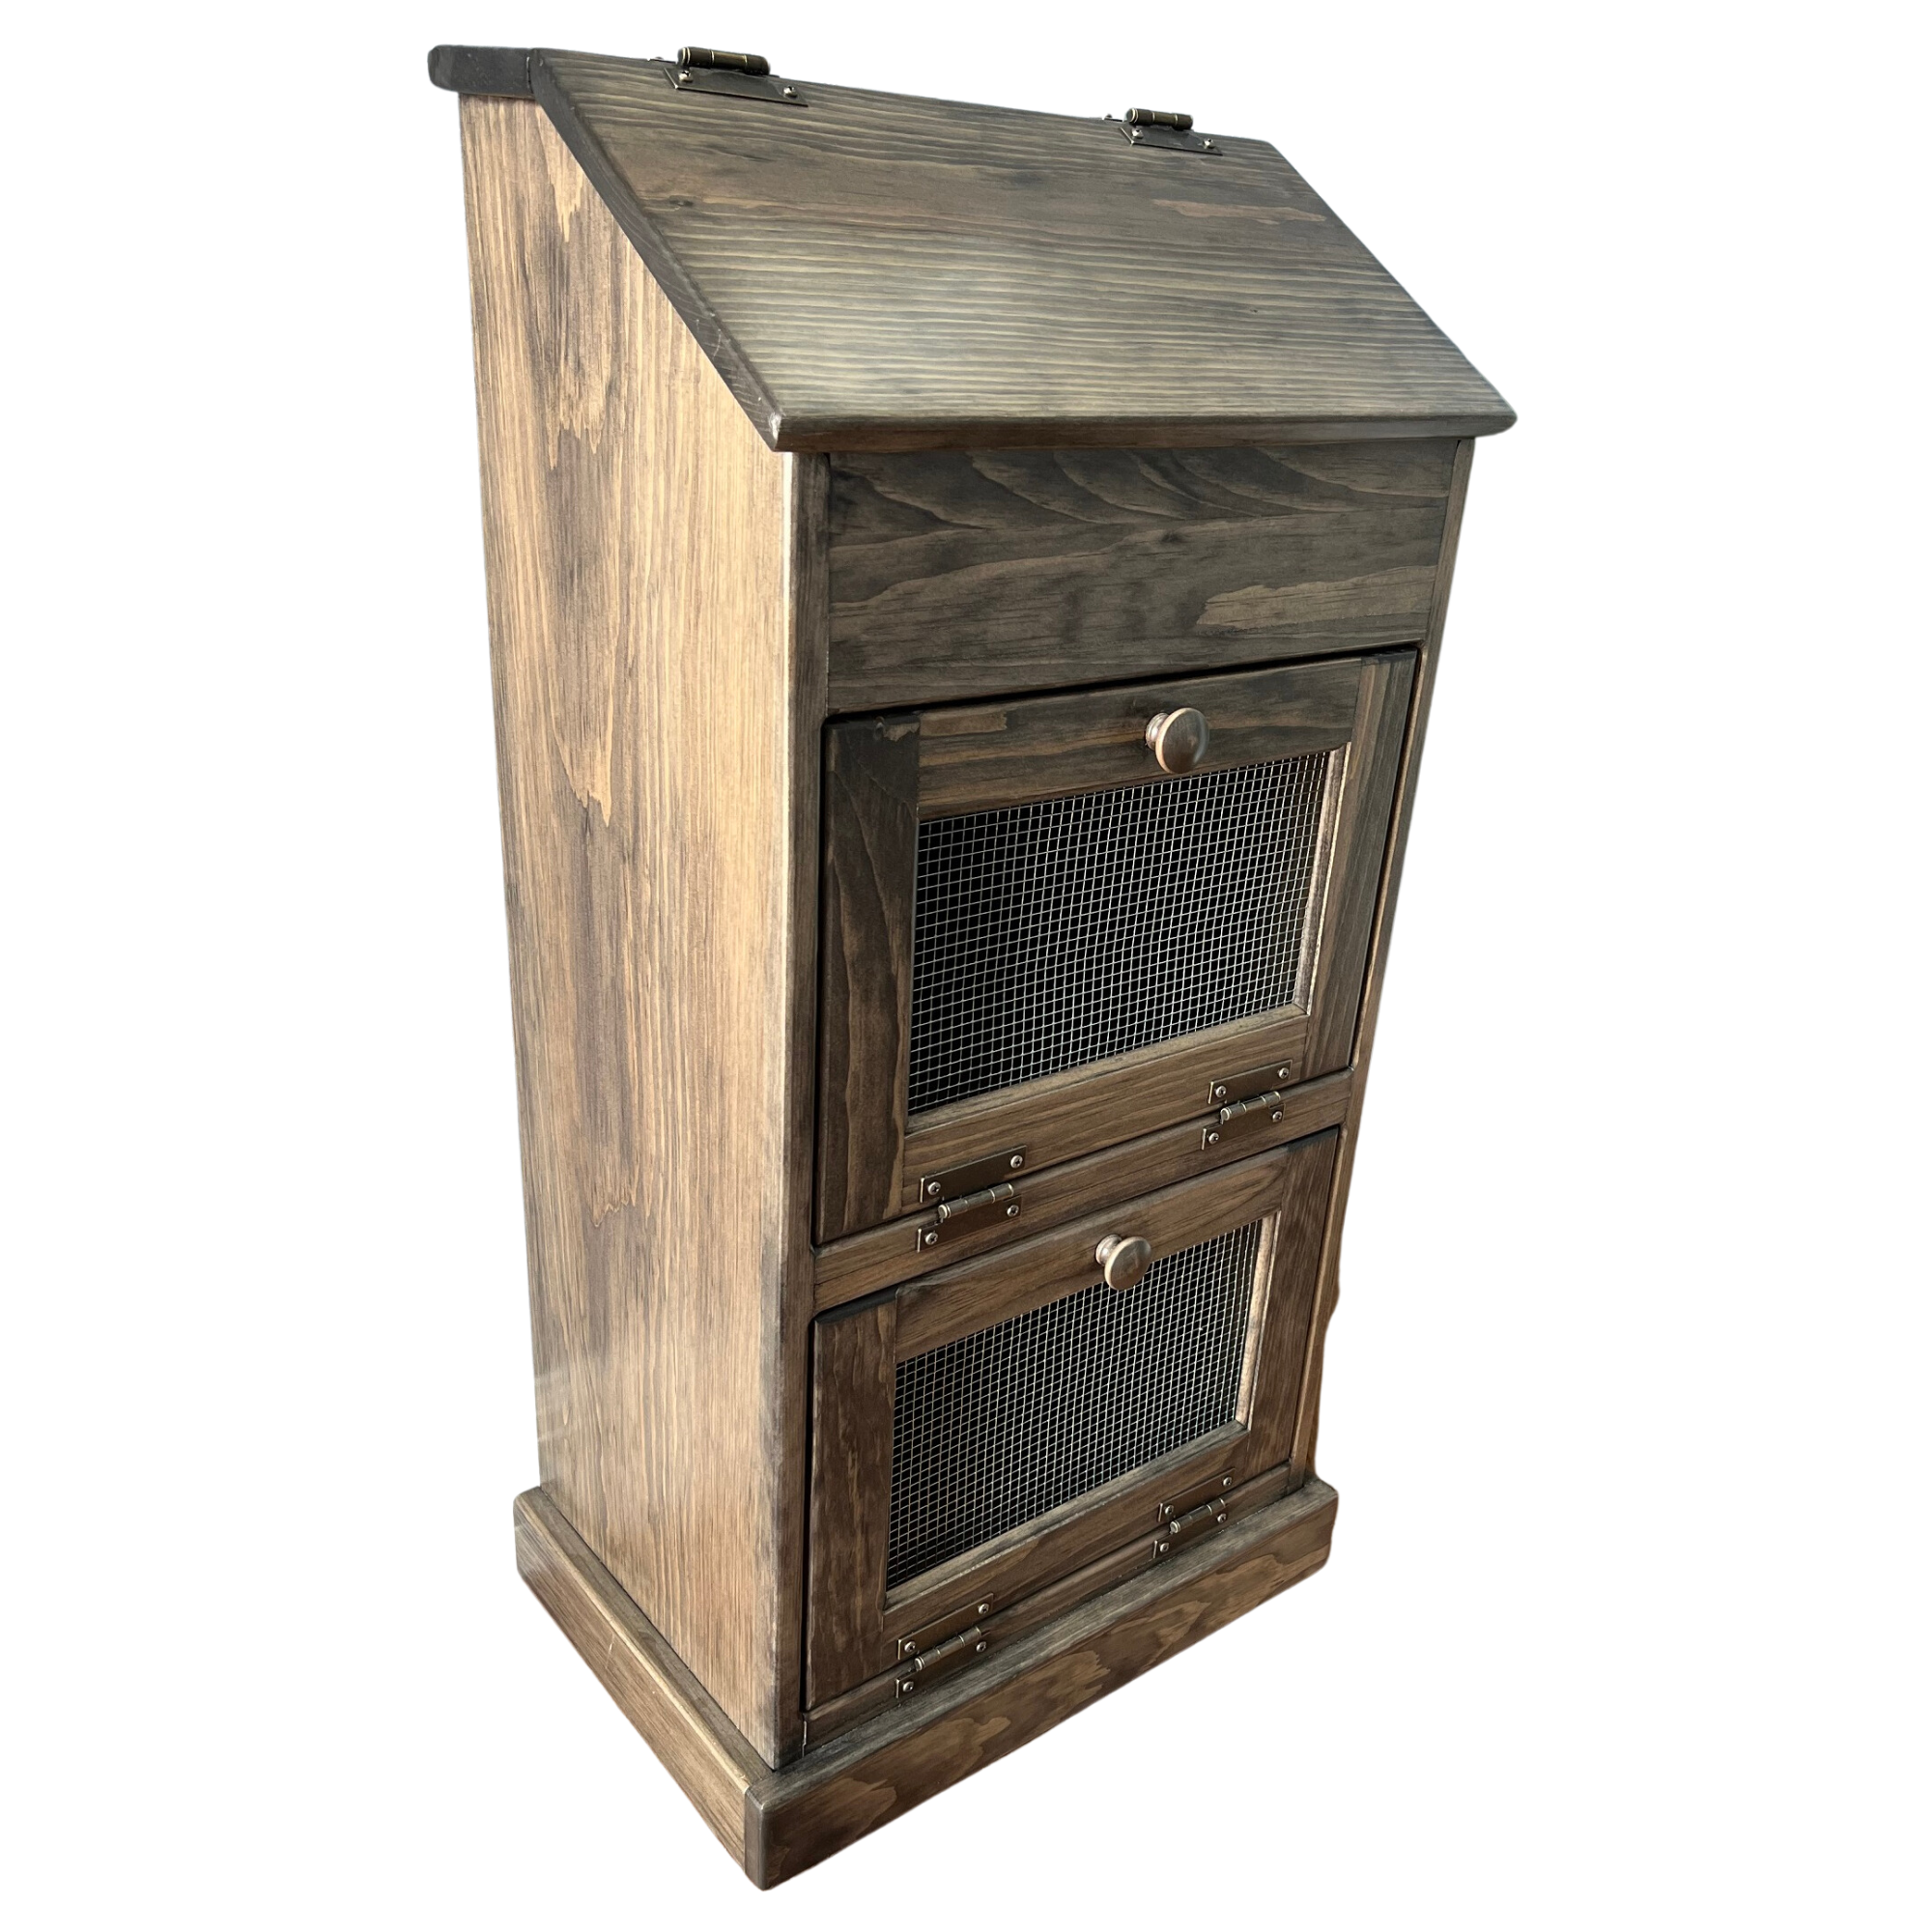 Amish Handcrafted Solid Wood Vegetable Bin / Cabinet - The Wood